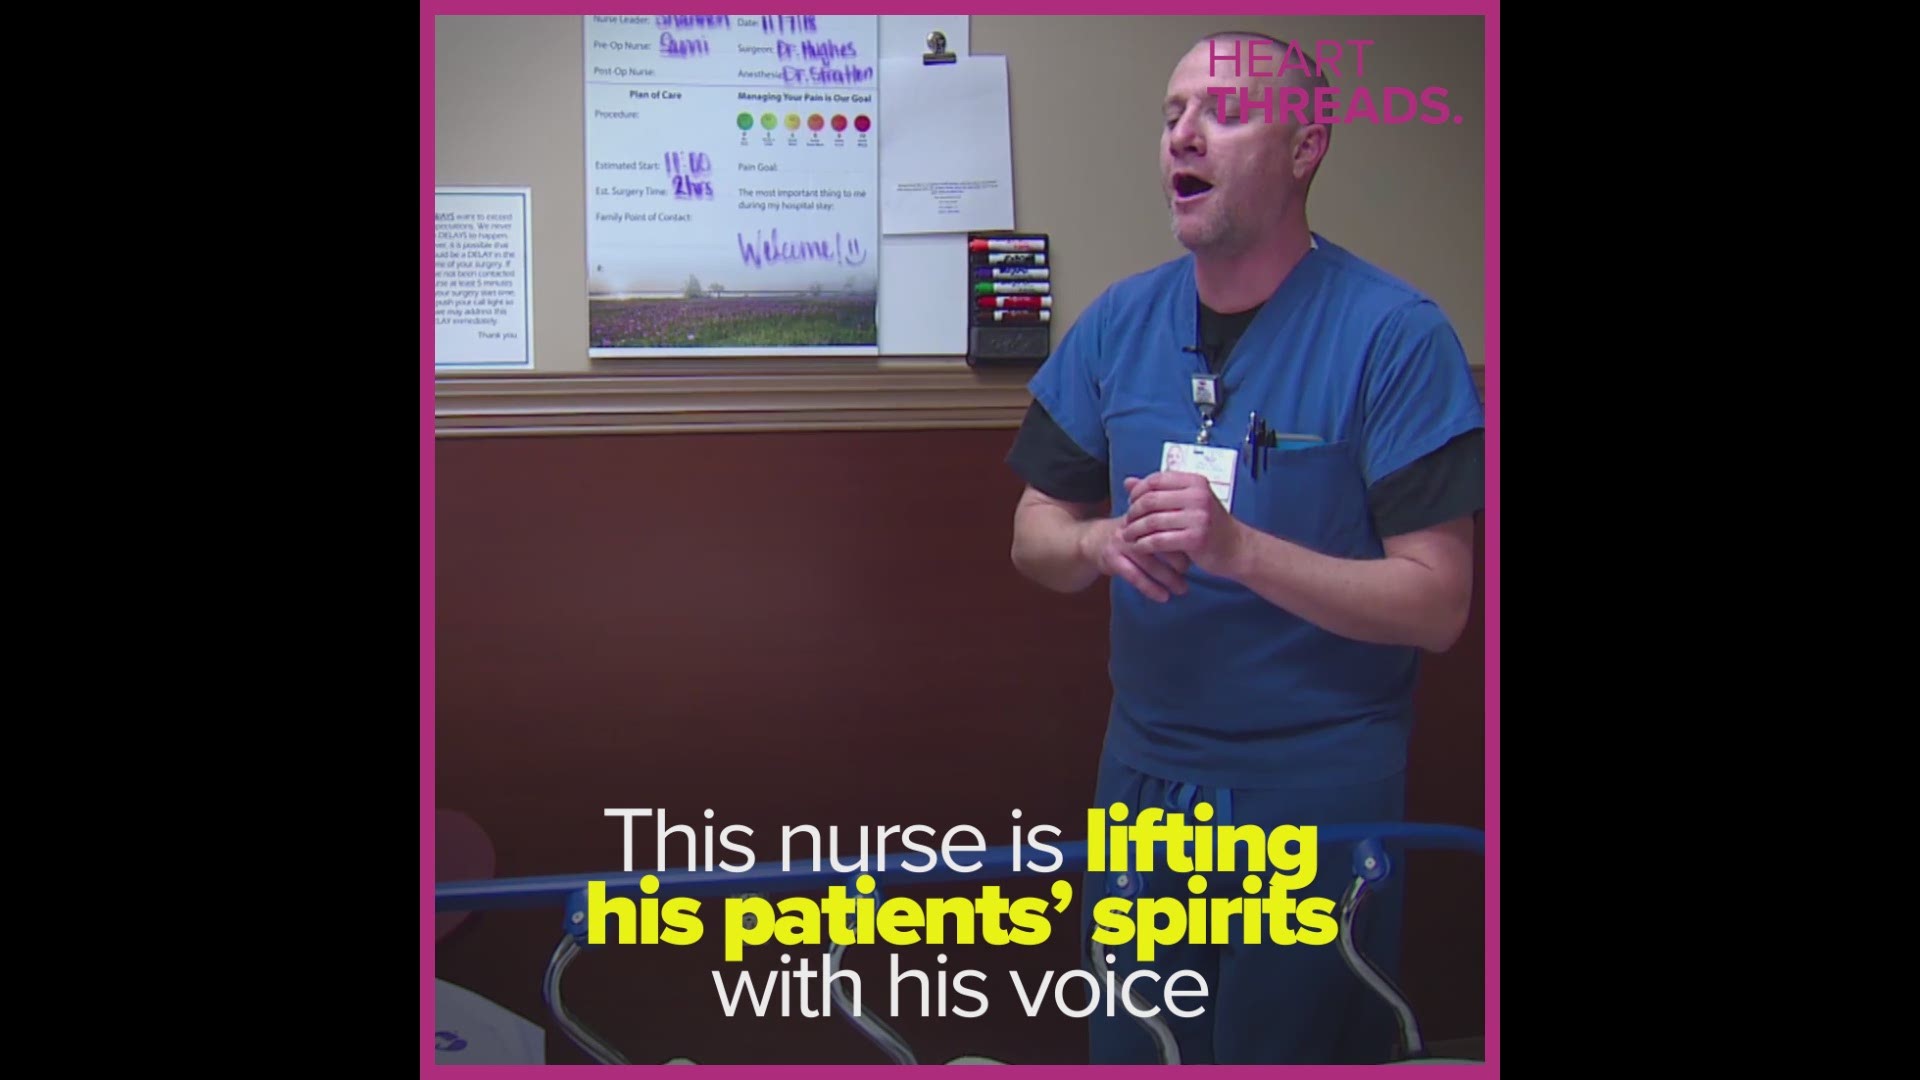 Tommy Rushton, also known as the "Singing Nurse," uses his voice to brighten up his patients' time in the hospital.